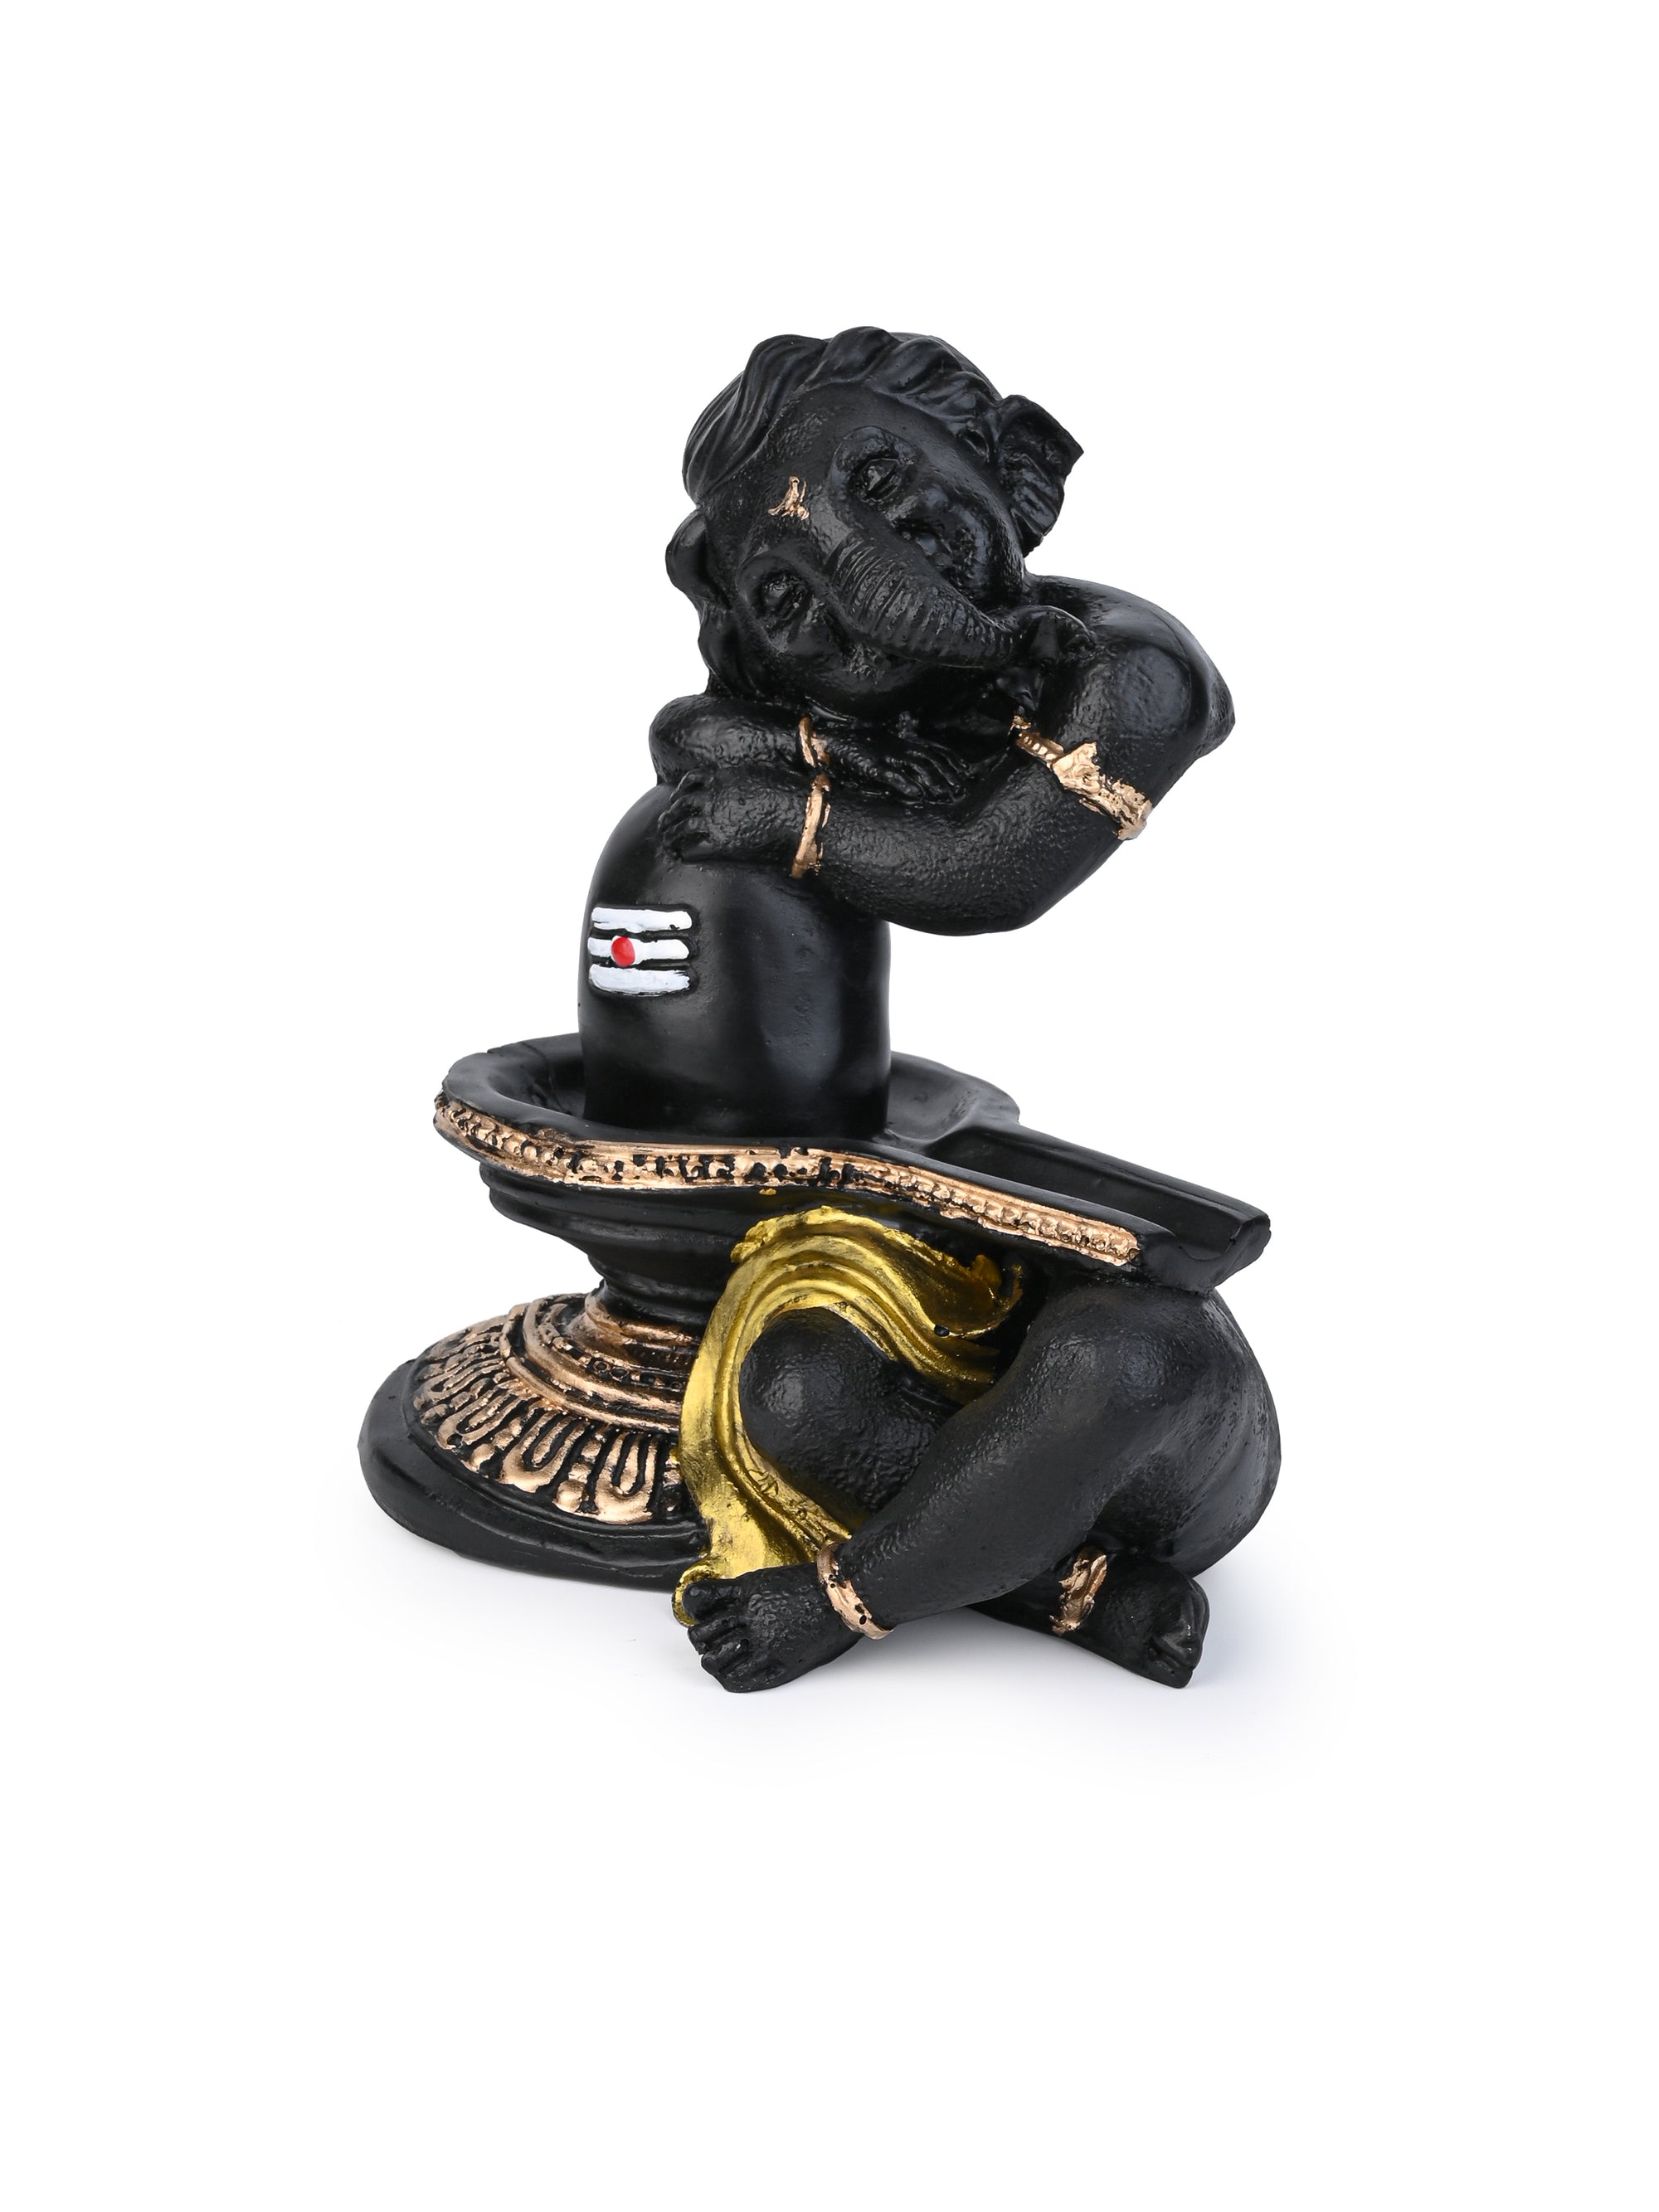 Lord Ganesh Shivling Aavatar - Elegant decor for home and office